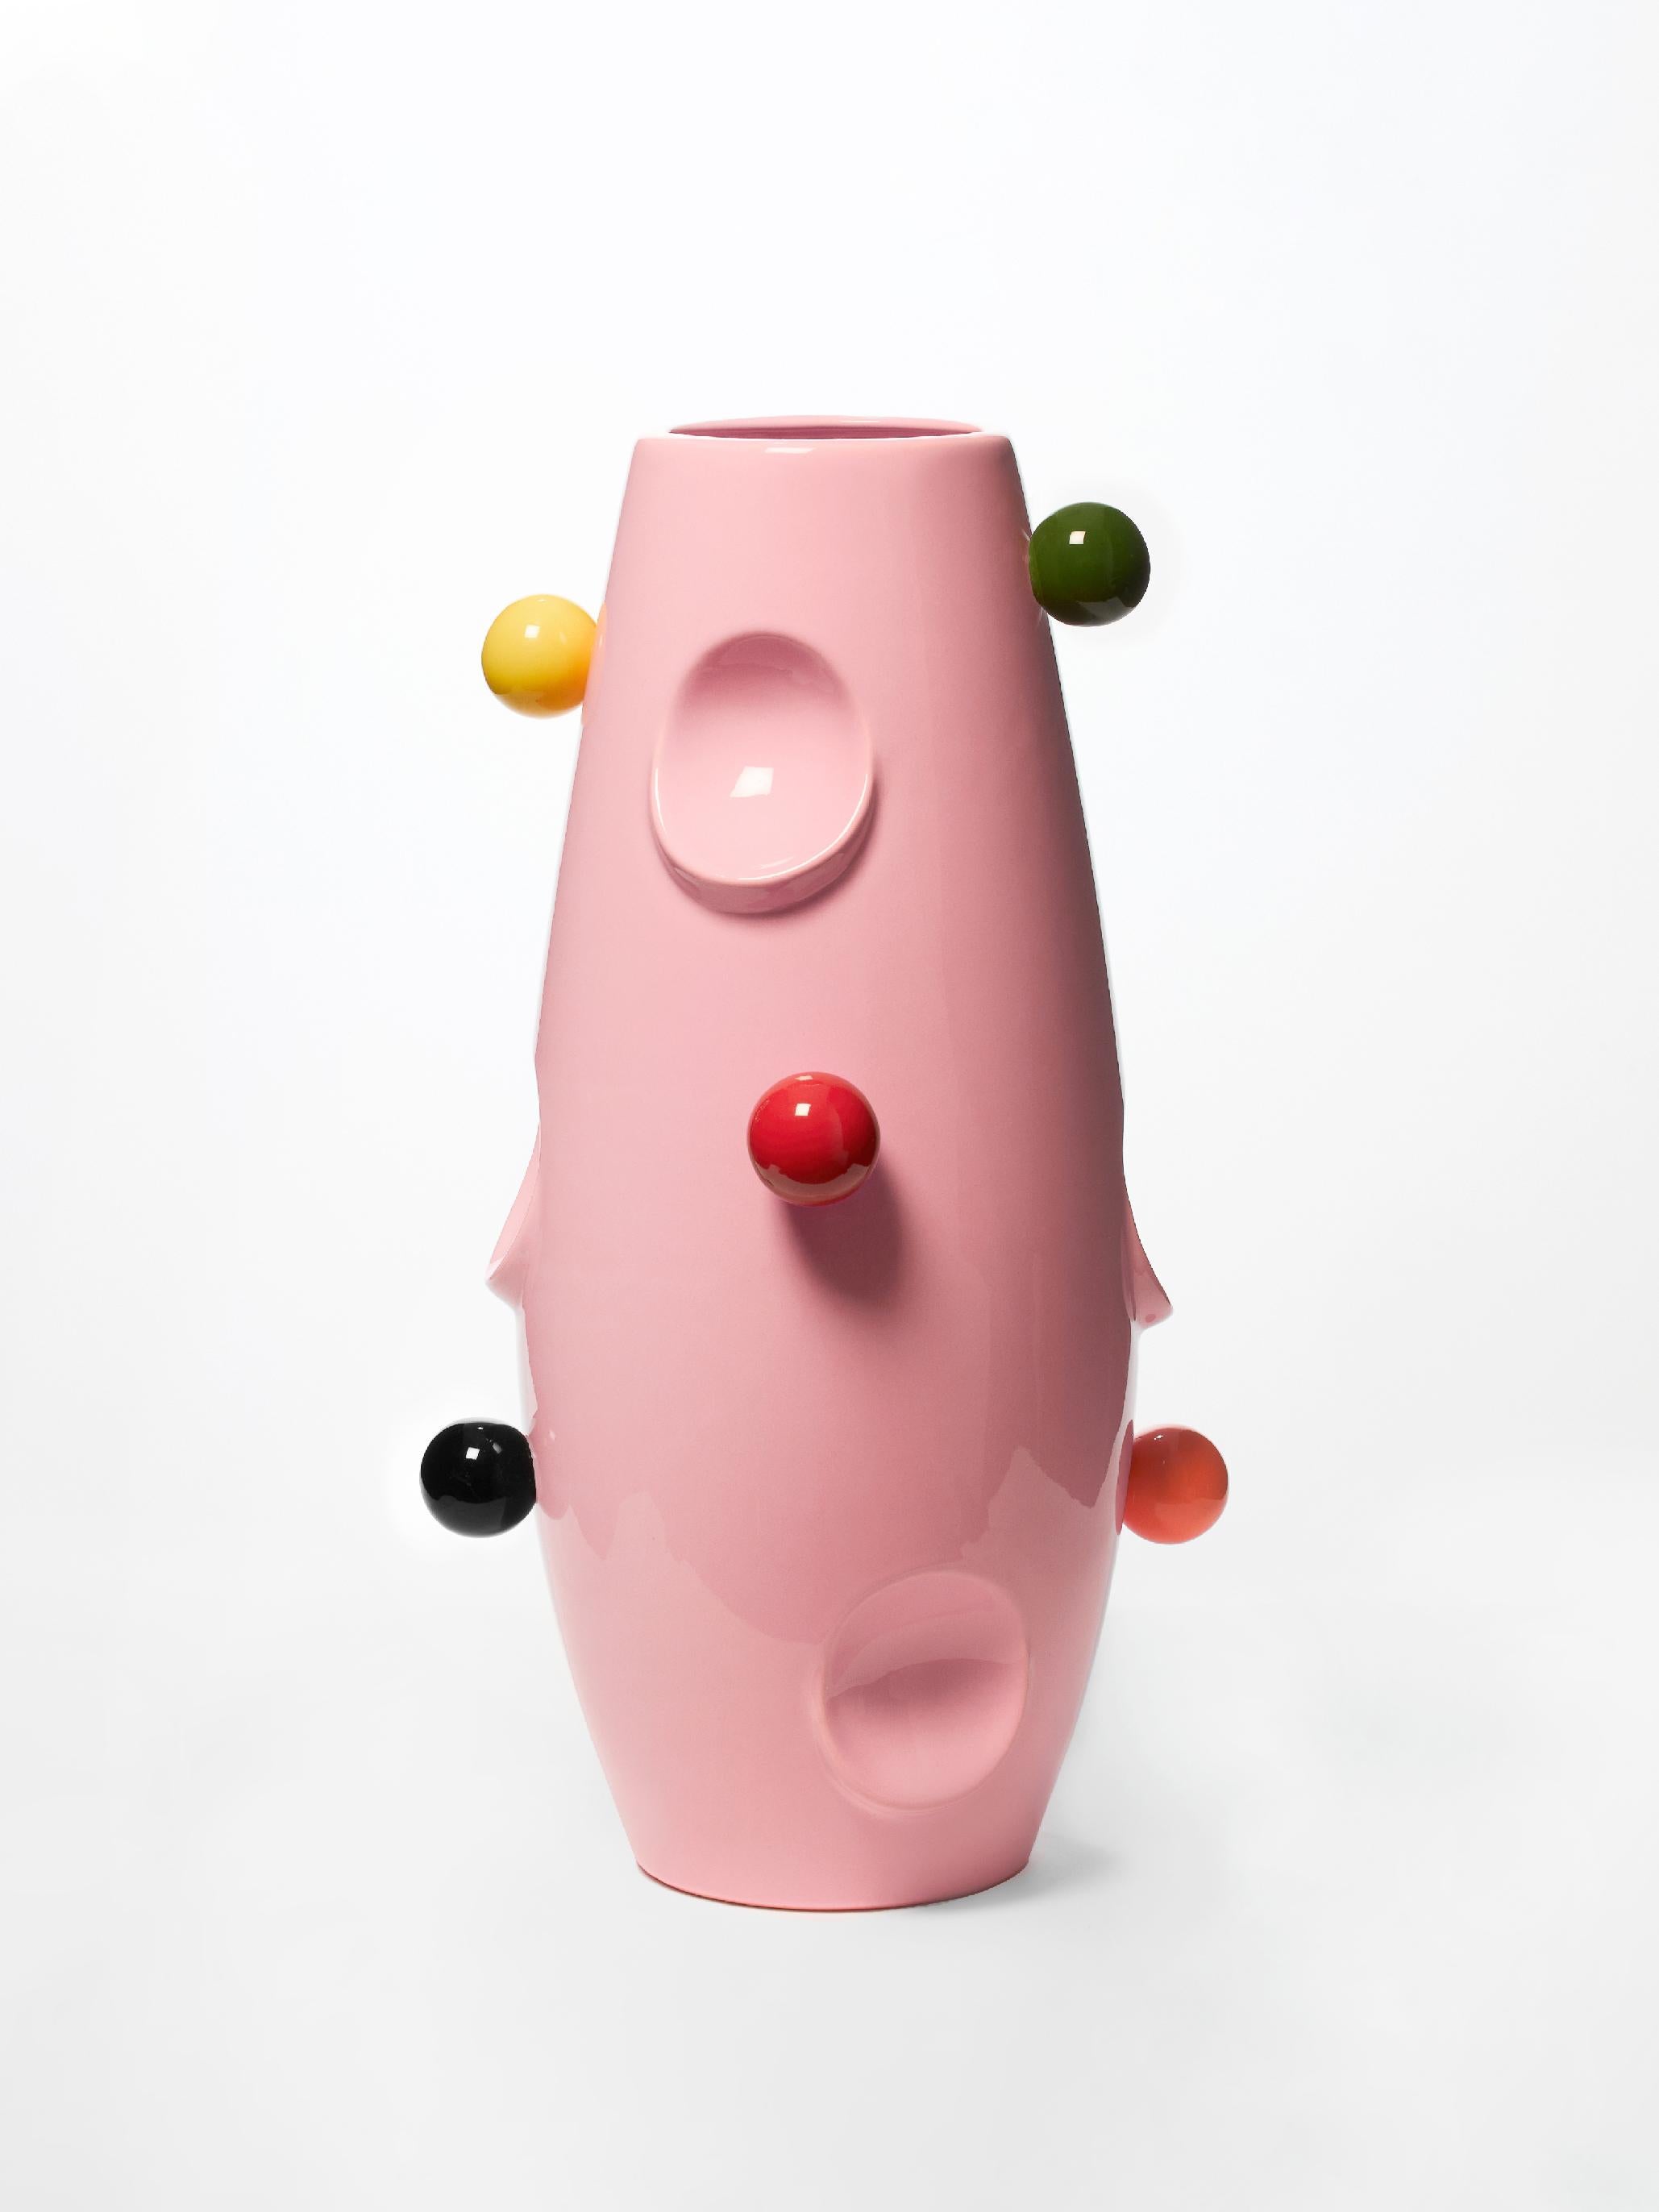 The OKO / CYRK vase adapts to the space it's in. Depending on the interior, it creates a fun atmosphere or (in the Nude version) discreetly introduces a bit of color. In this edition, the classic form of the OKO vase is enriched with glazed balls in